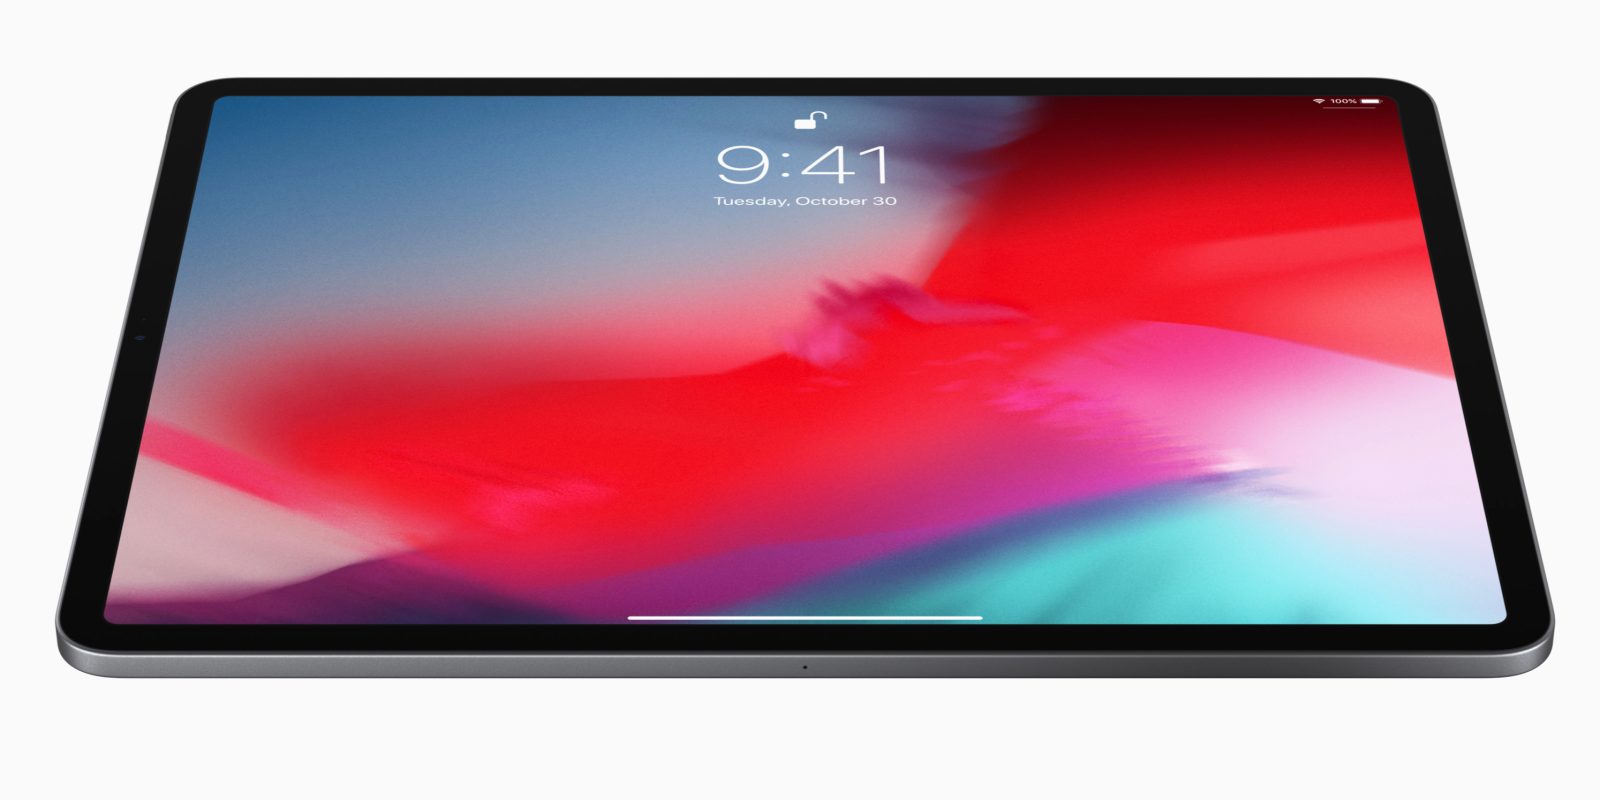 Flipboard: Almost all of Apple’s 12.9-inch iPad Pro models on sale from